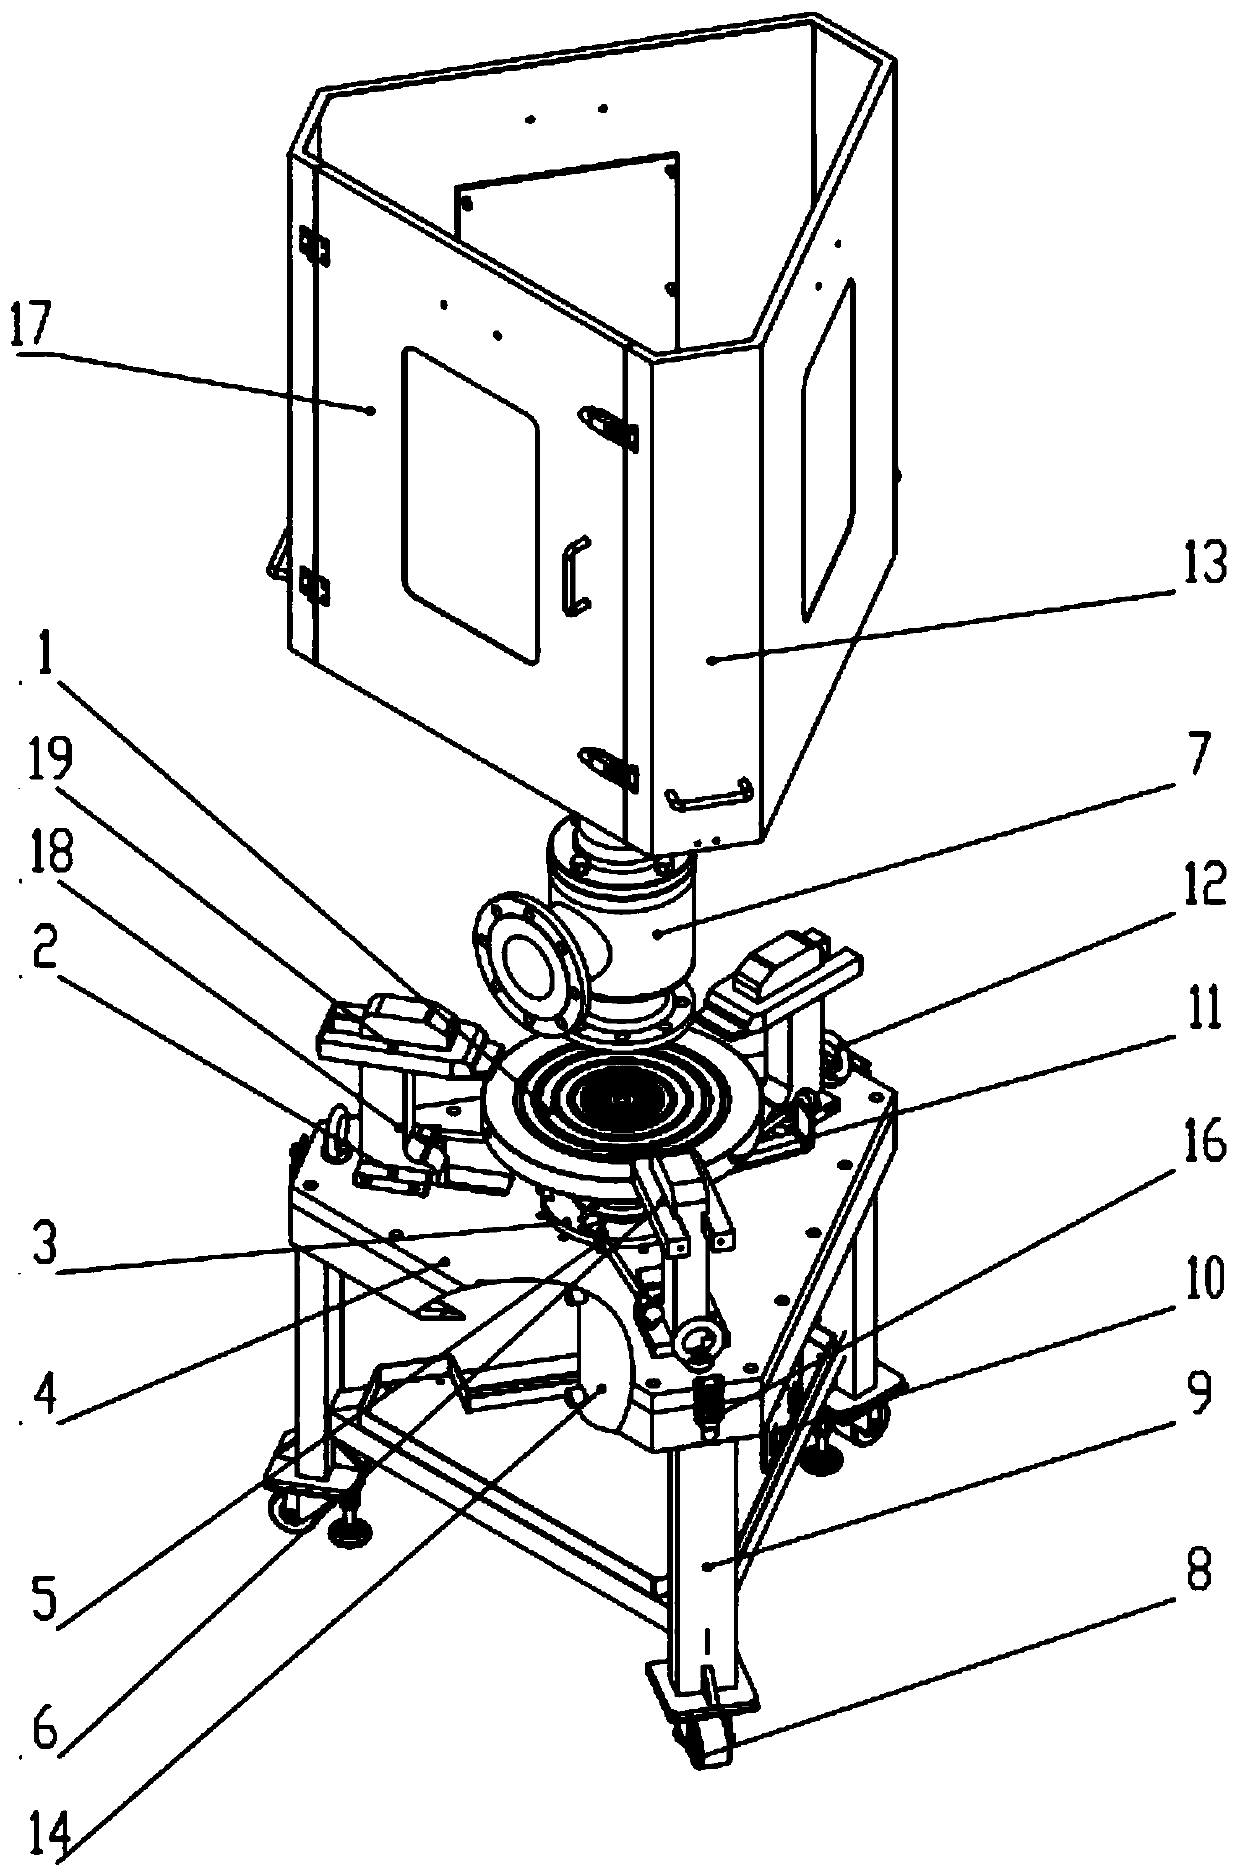 Clamping mechanism for inspecting safety valve